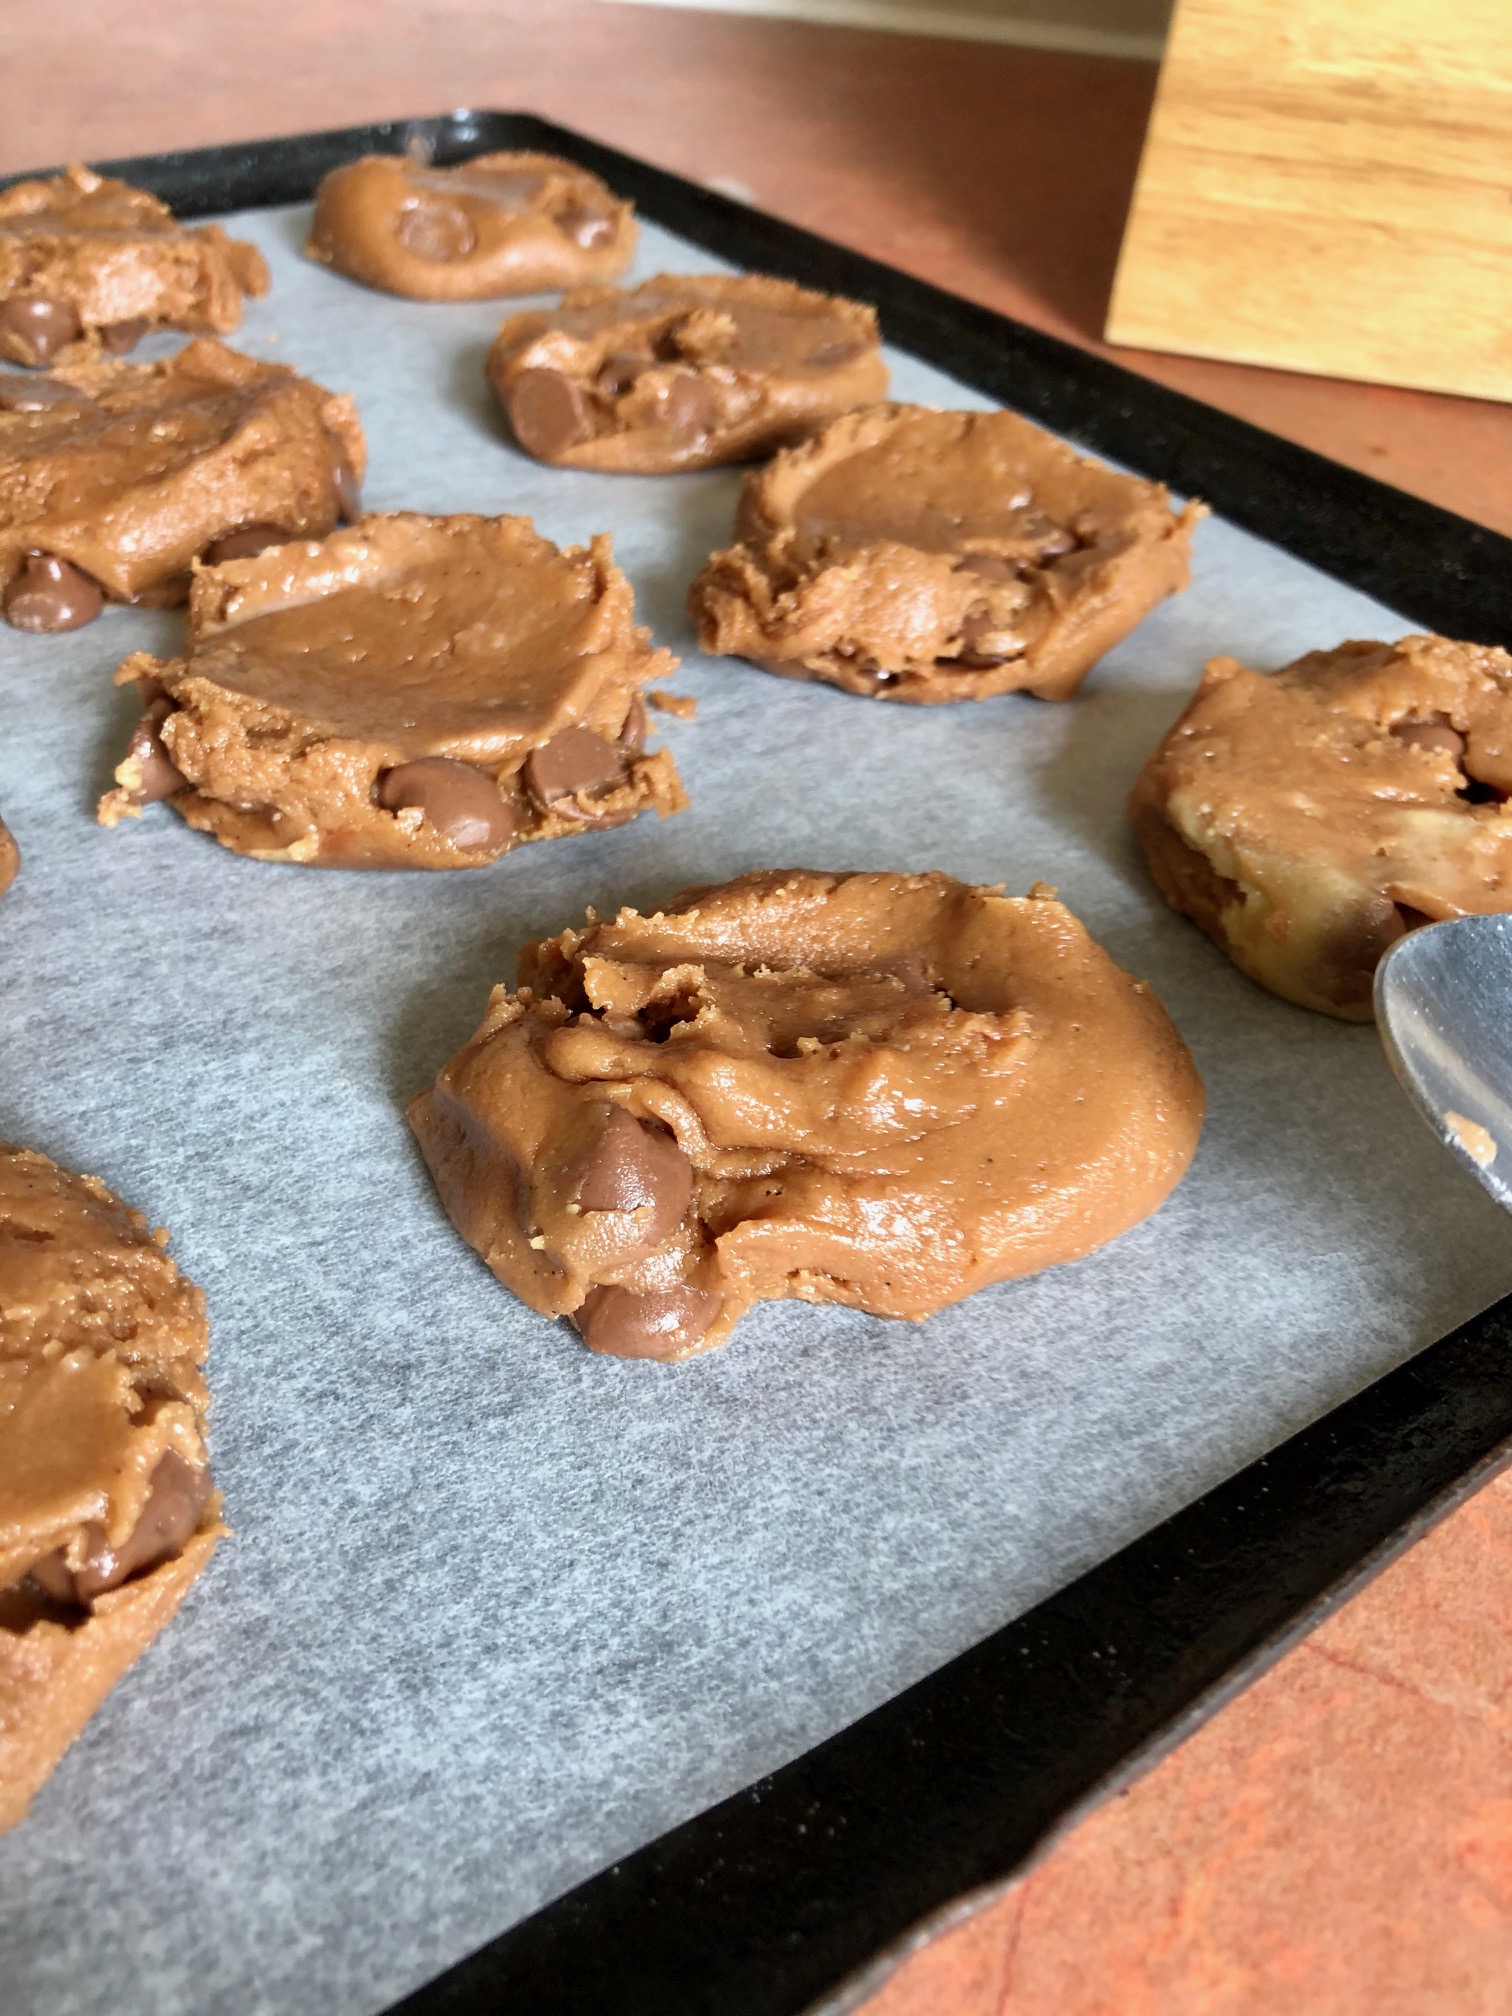 You know the kids will be running back for more when you make them these delicious Triple Chocolate and Peanut Butter Cookies